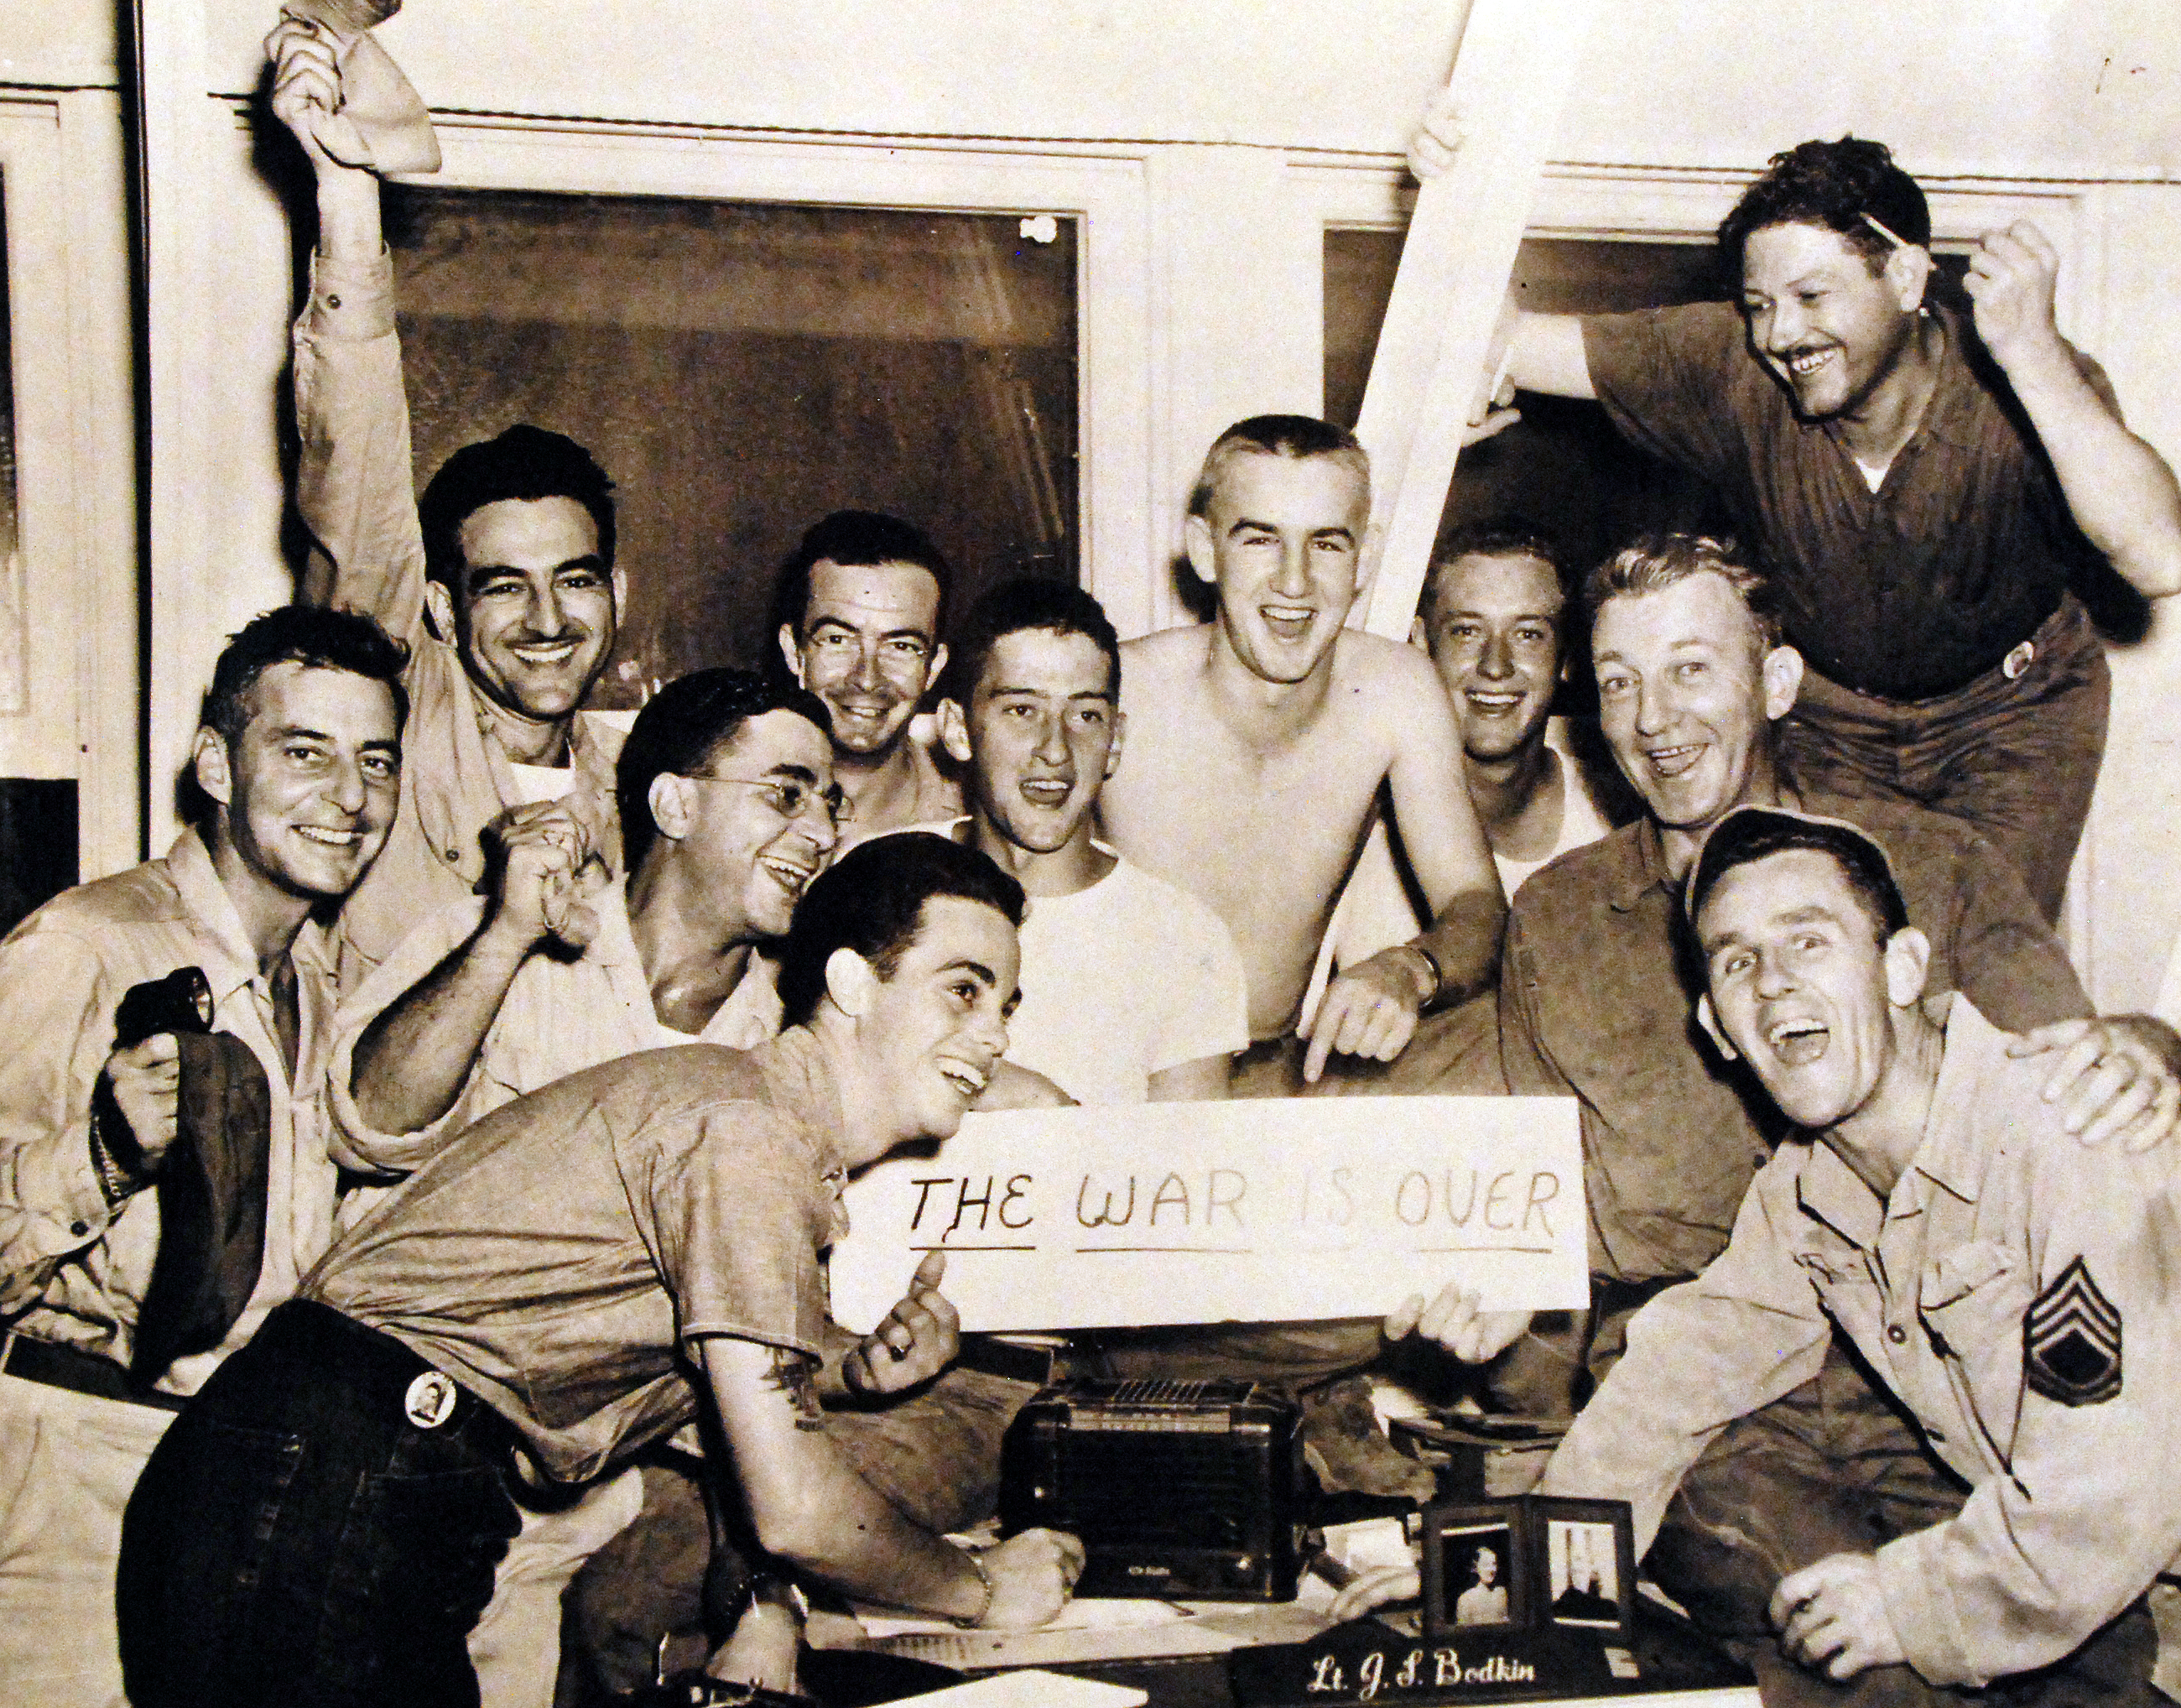 Carl Gurtcheff, Vic Colucci, Arthur Ryding, Clifford Martin, William Reigger, James Badgett, J. F. Whitely, Dan Brown, Clayton Aylor, and Denny O'Neill celebrating victory at CINCPAC headquarters in Guam, 15 Aug 1945